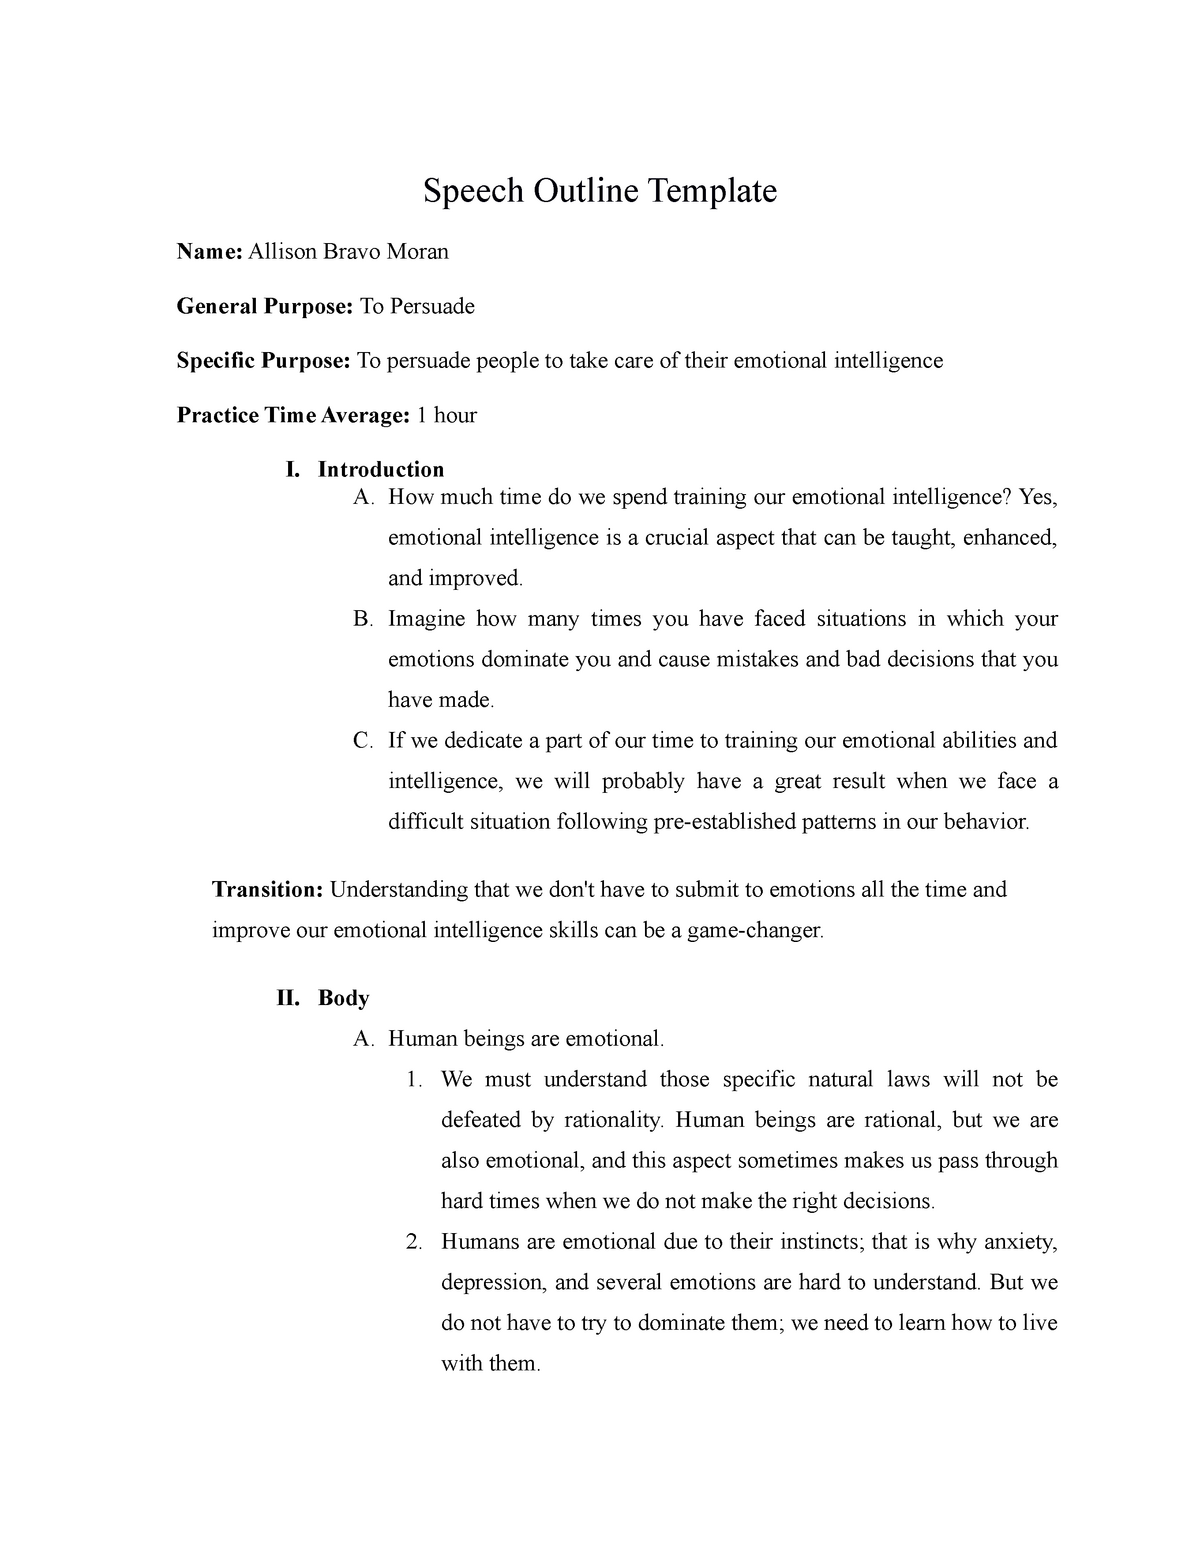 speech and outline